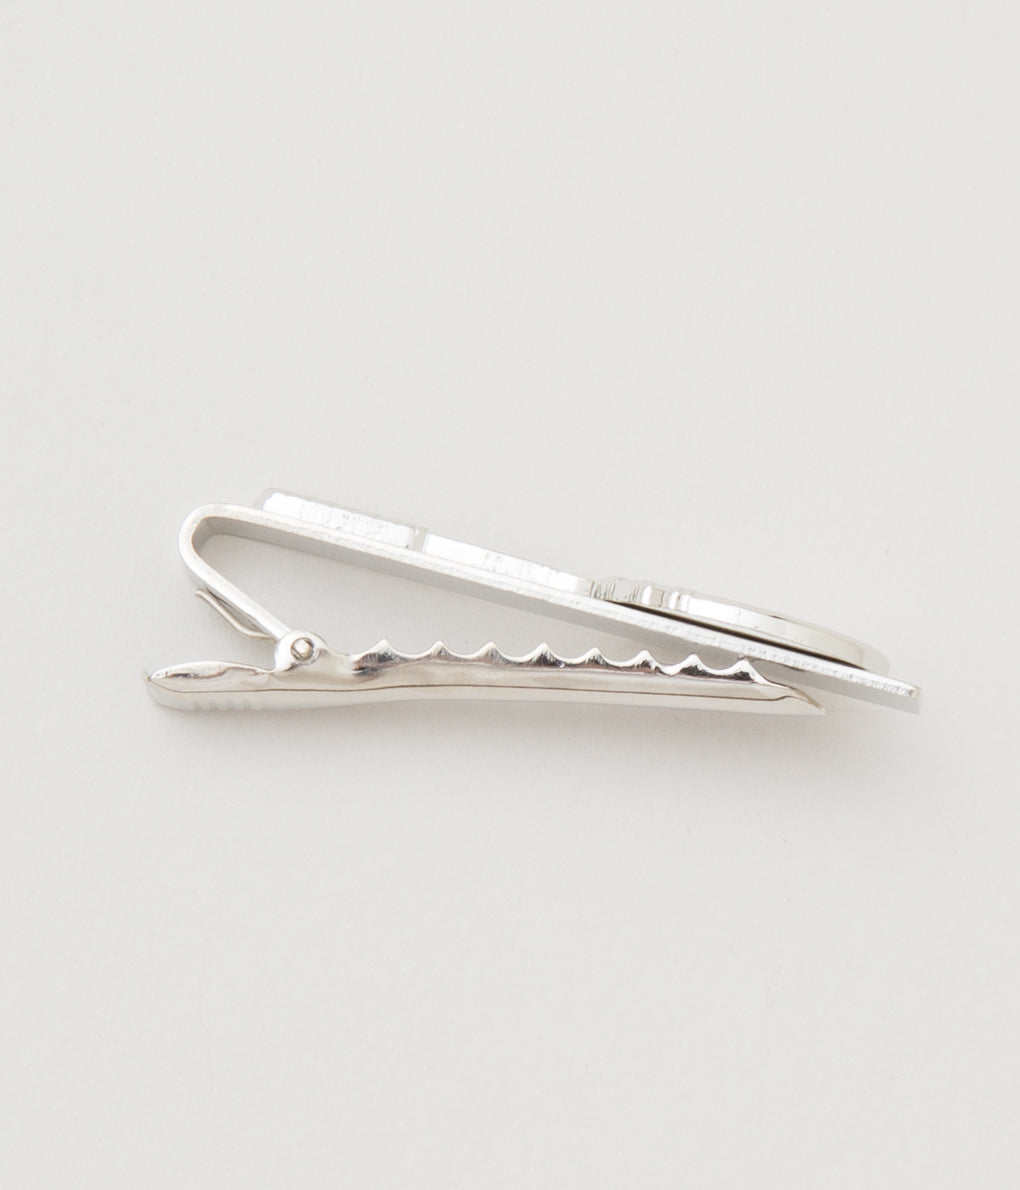 FINE AND DANDY "TIE BARS TENNIS RACKETS"(SILVER)